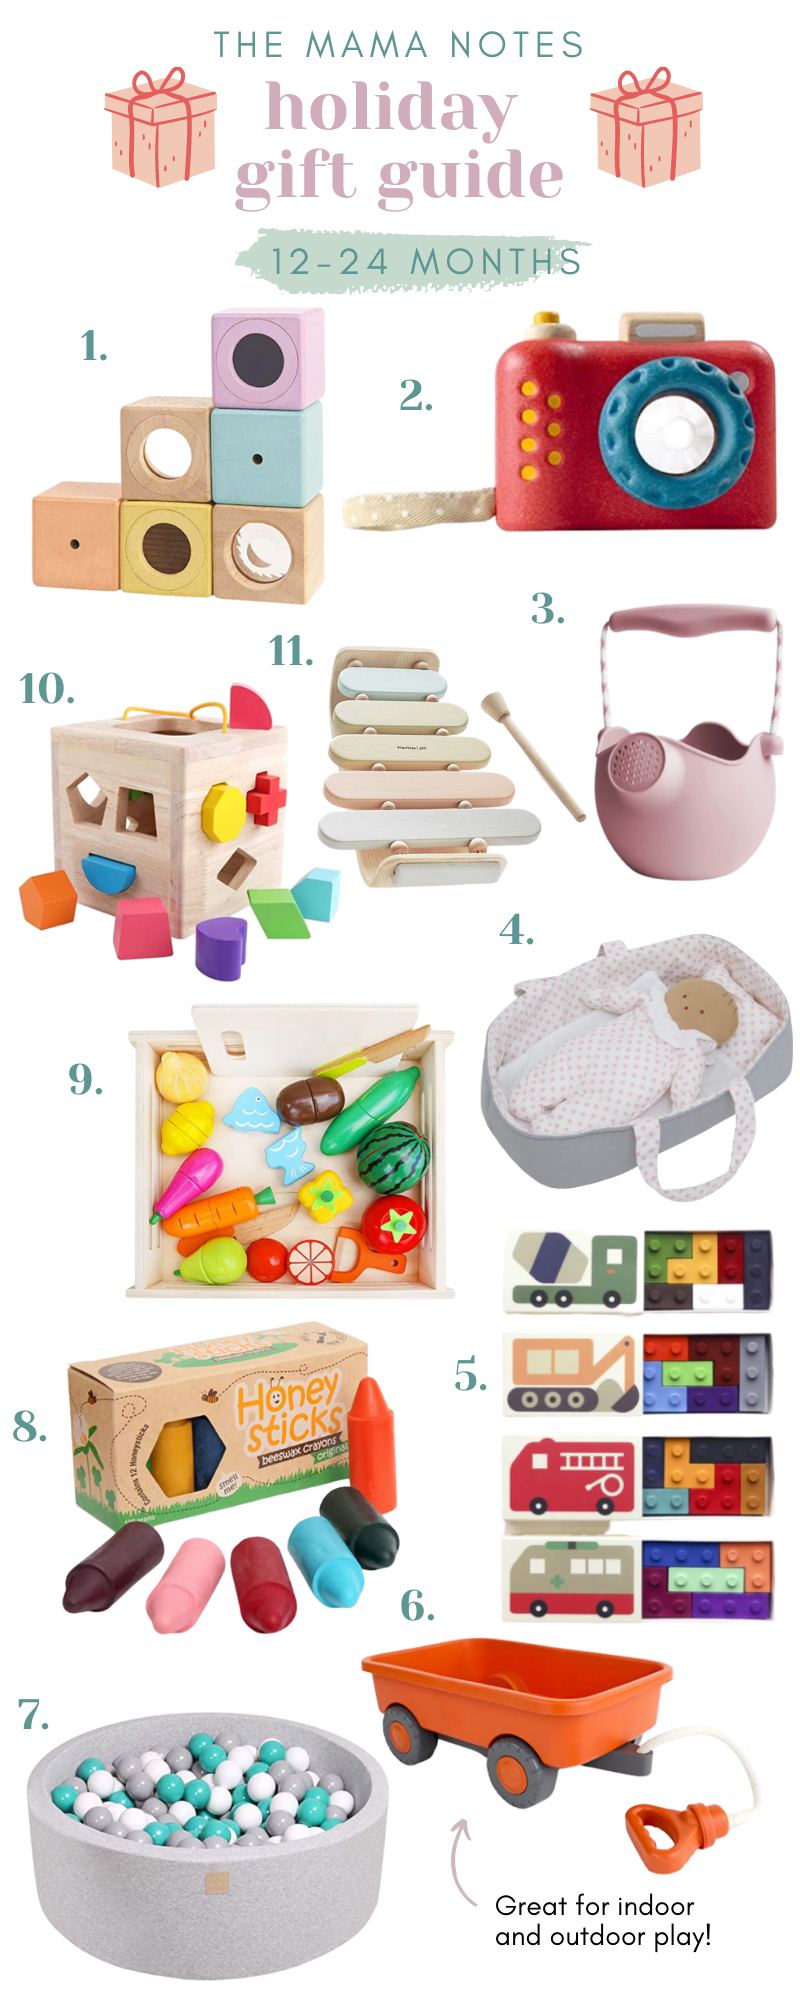 Holiday Gift Ideas for Blind Children - Birth to 24 Months